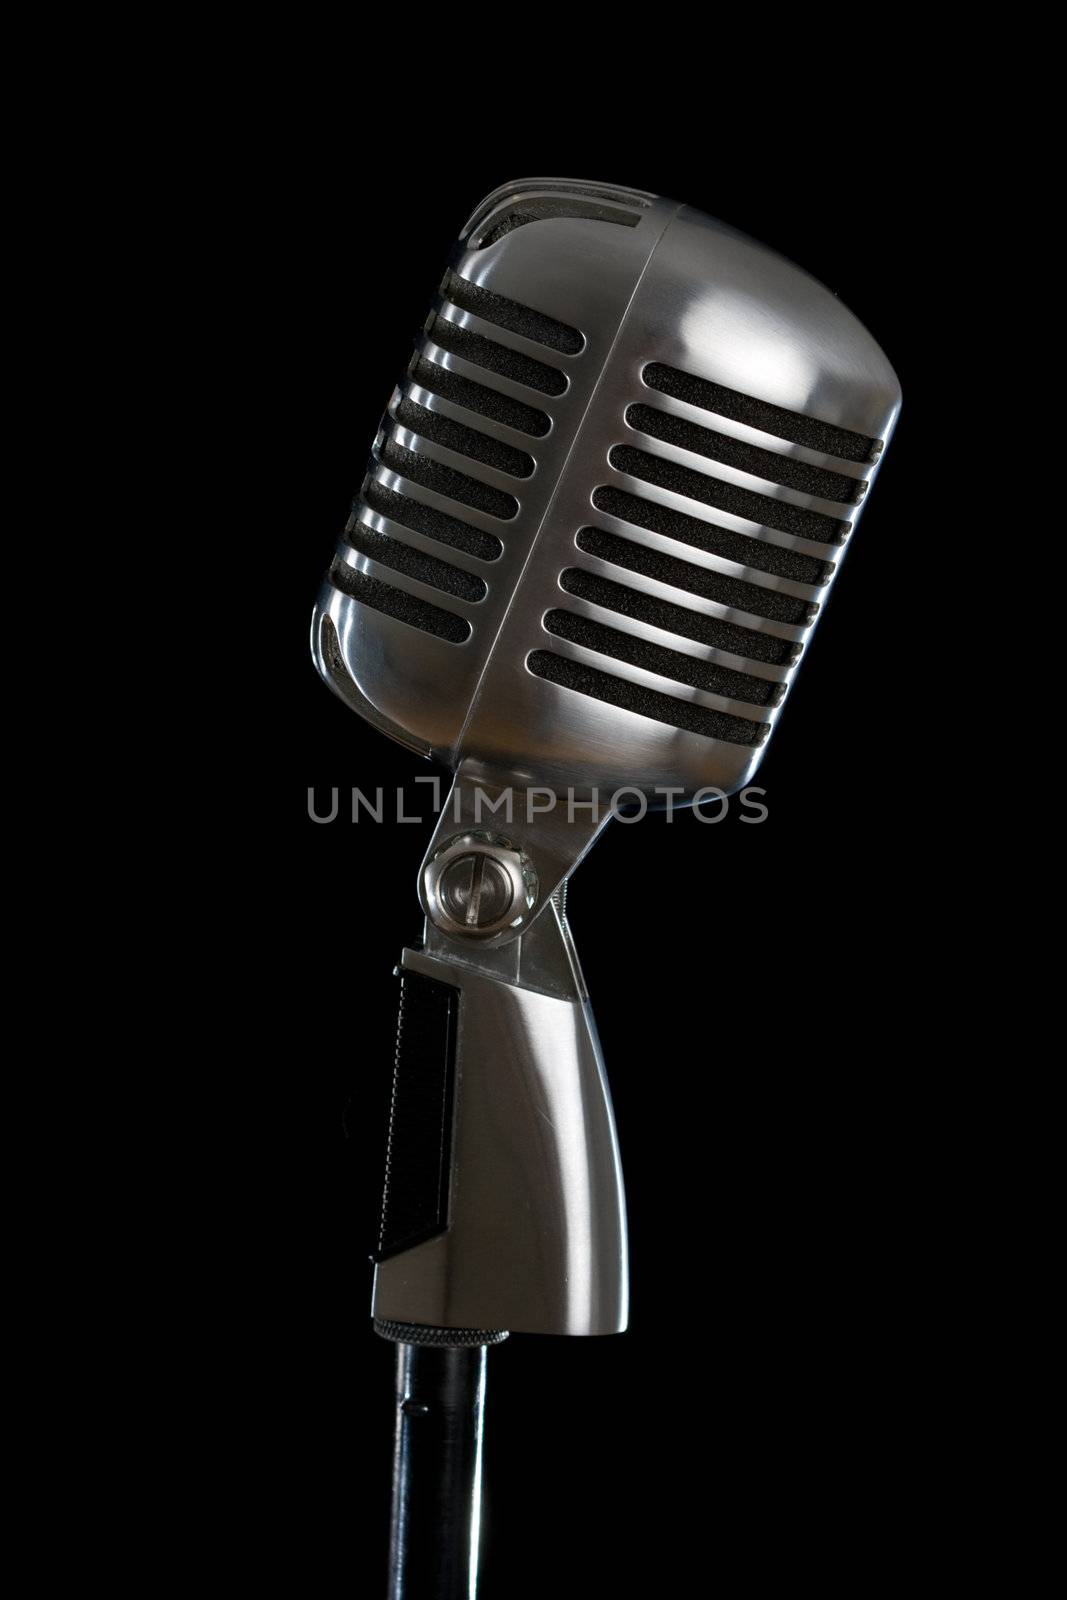 Retro microphone isolated on the black background